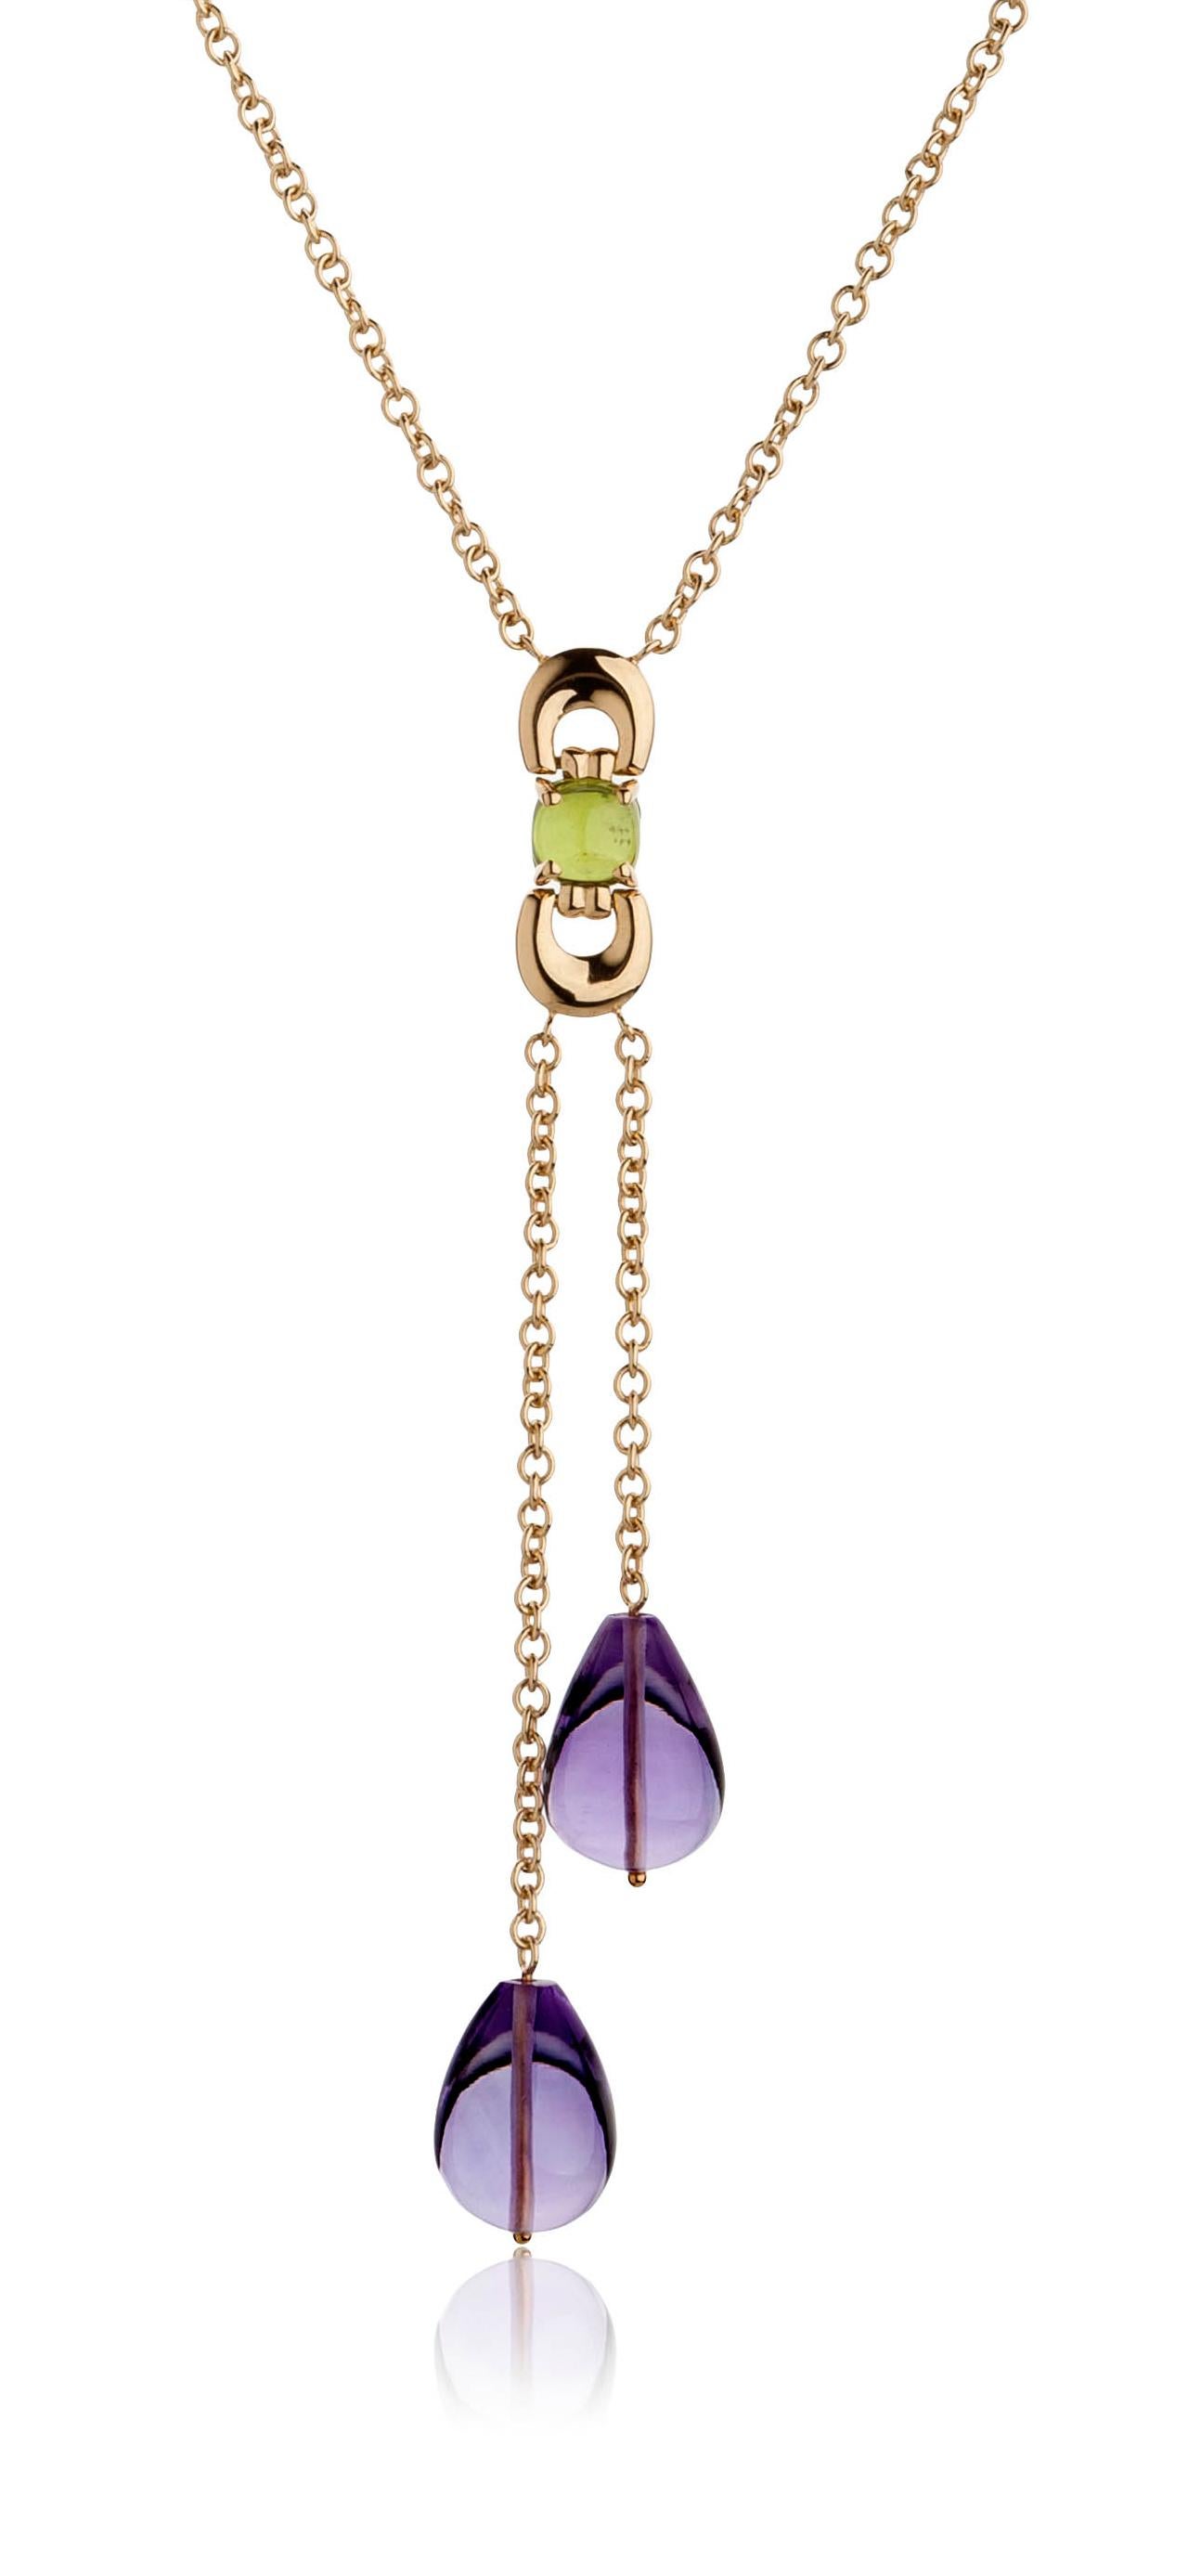 Designed to captivate and inspire, the Lariat Necklace from the Secret of Berenice Collection features two exquisite Amethyst drops in alluring violet hues. Ten cushion-cut Peridot gemstones are carefully set around 5 signature links of the Secret